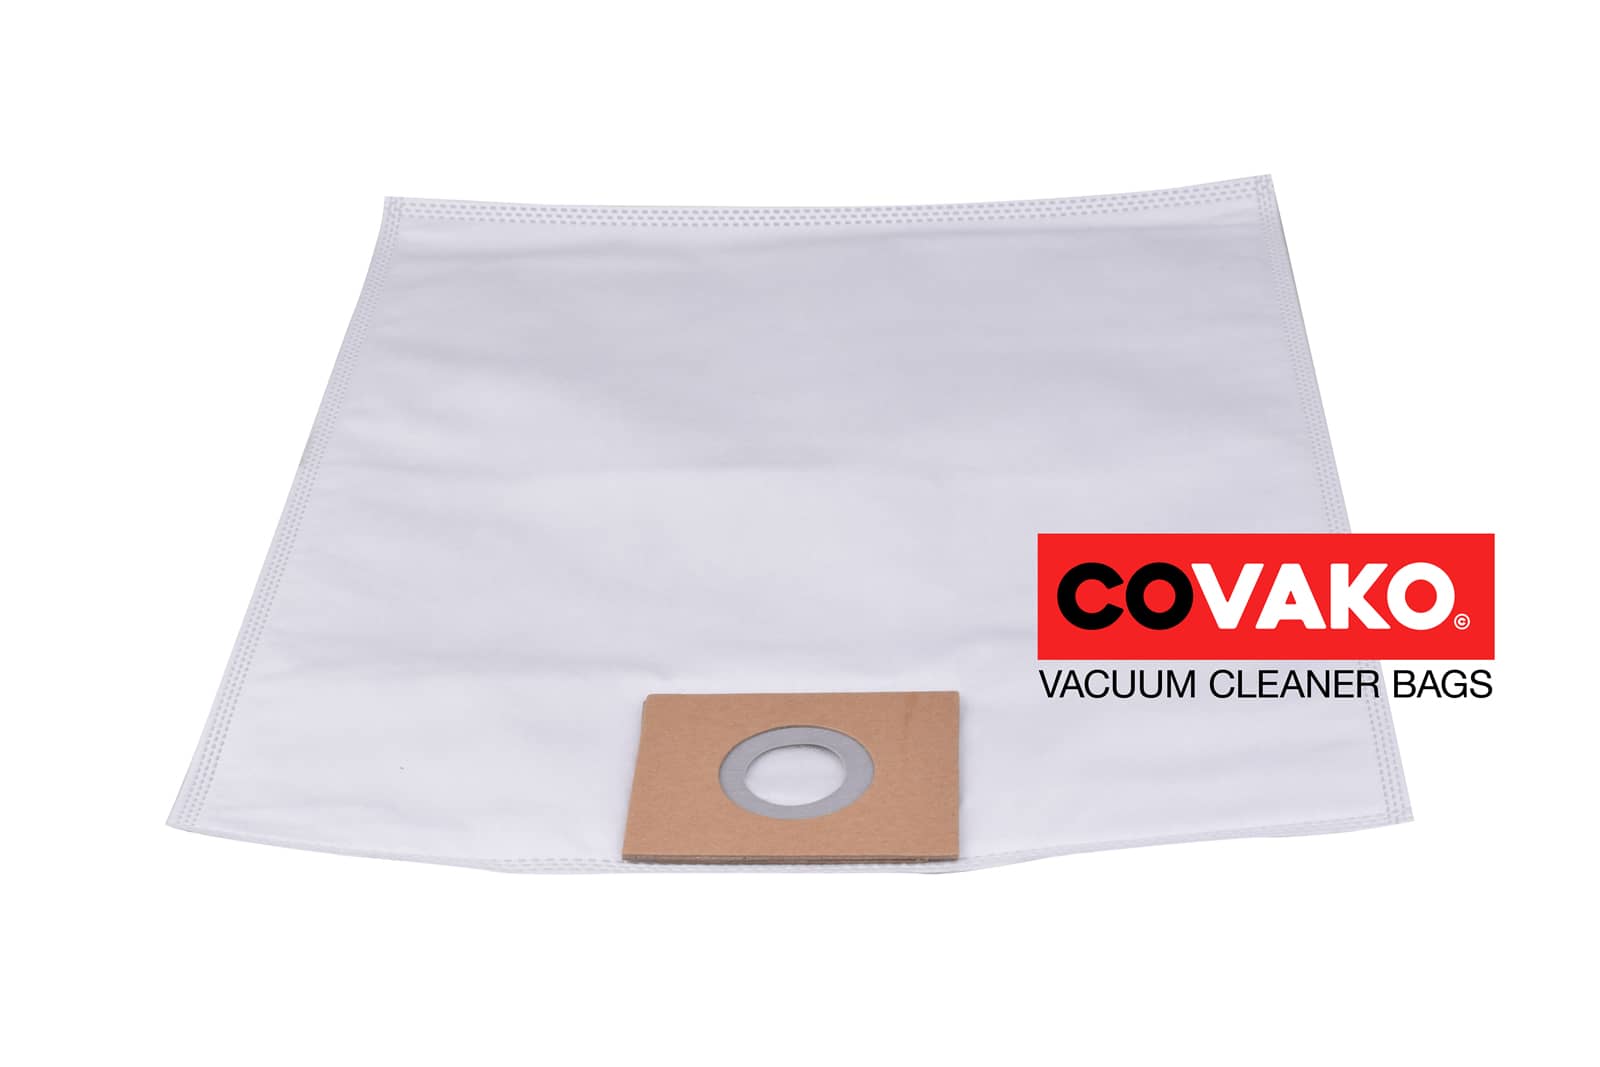 I-vac Dryver 15RE / Synthesis - I-vac vacuum cleaner bags